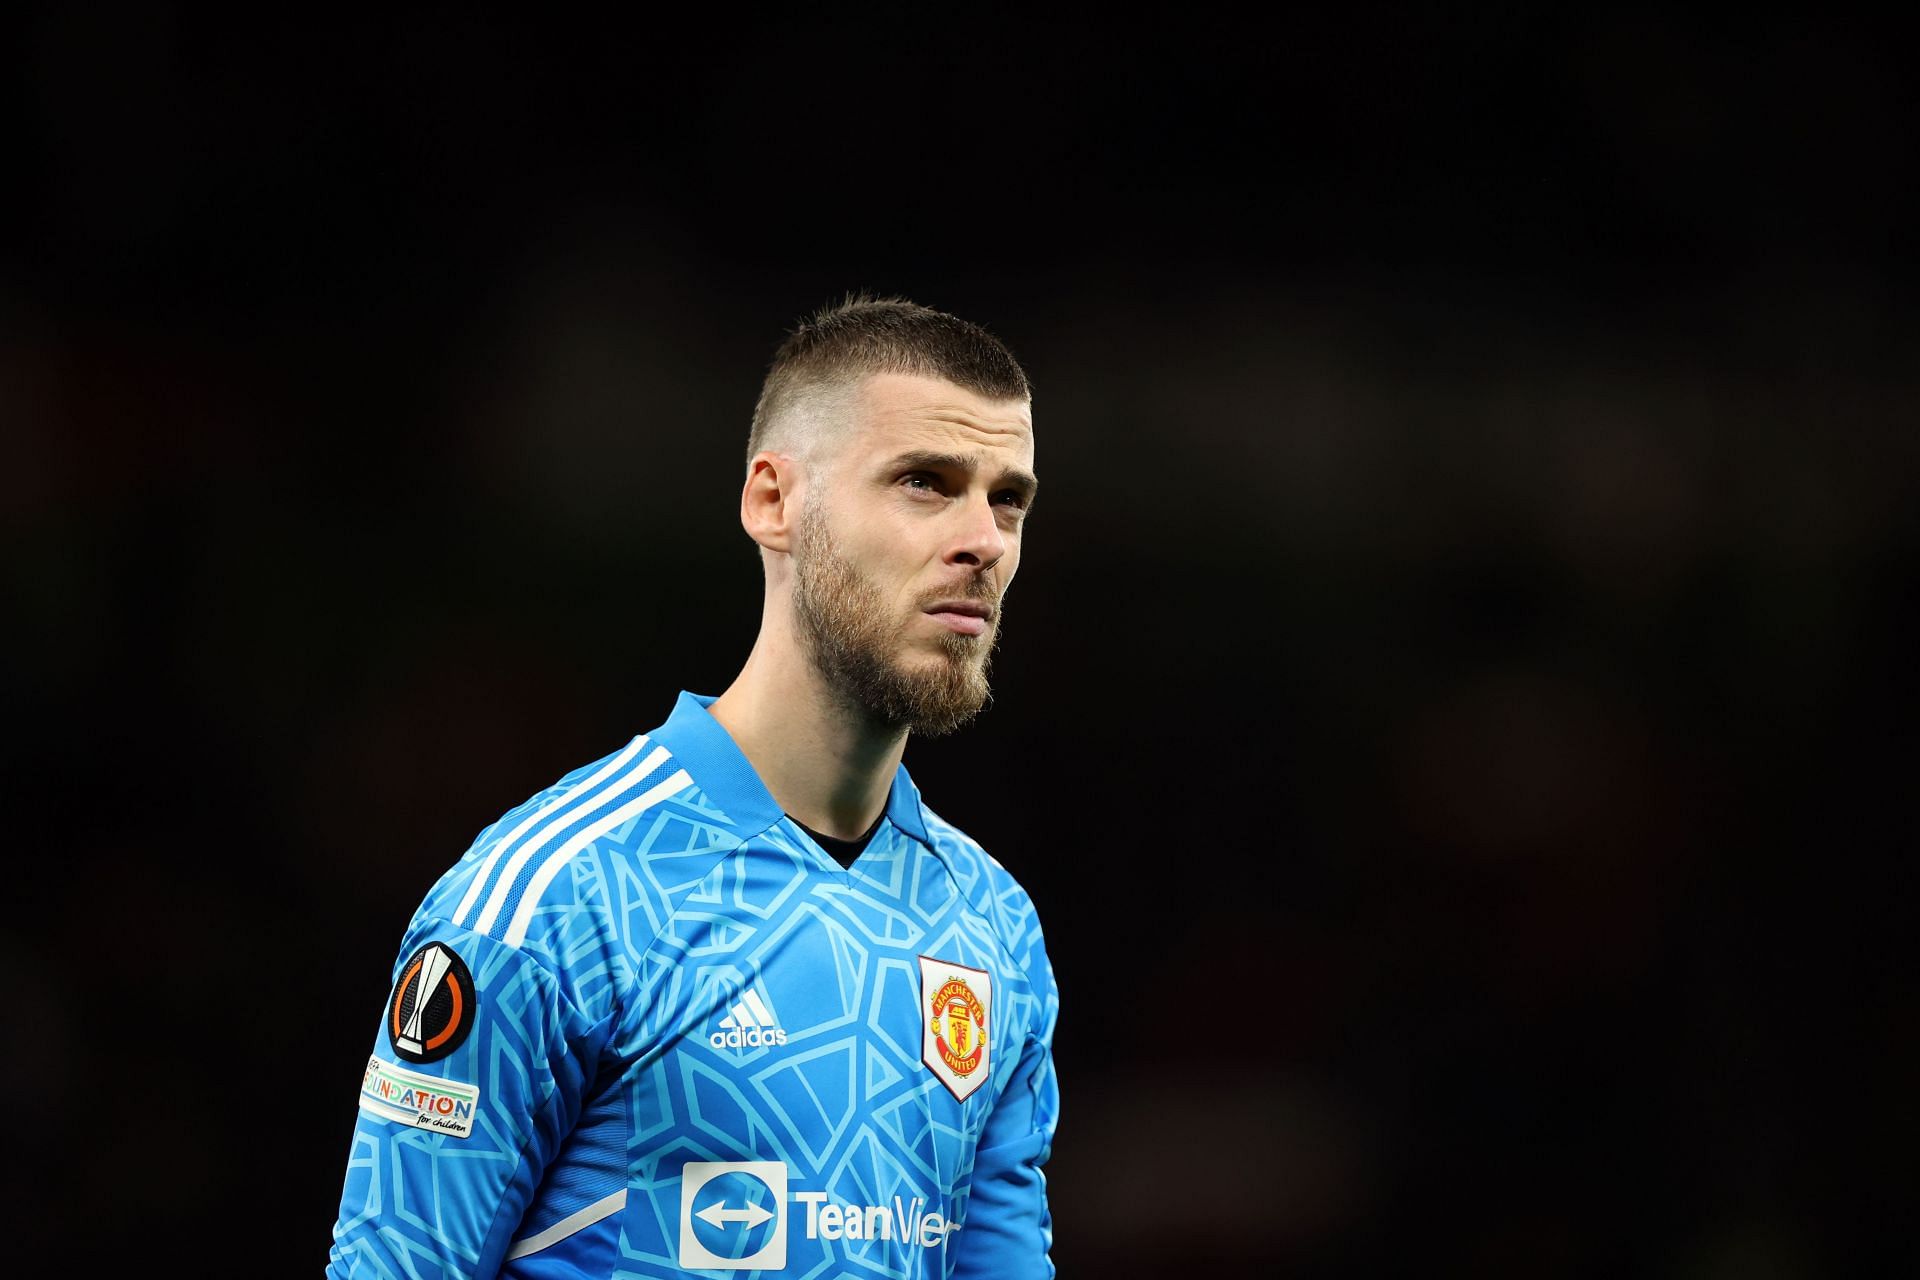 De Gea has been immense for the Red Devils